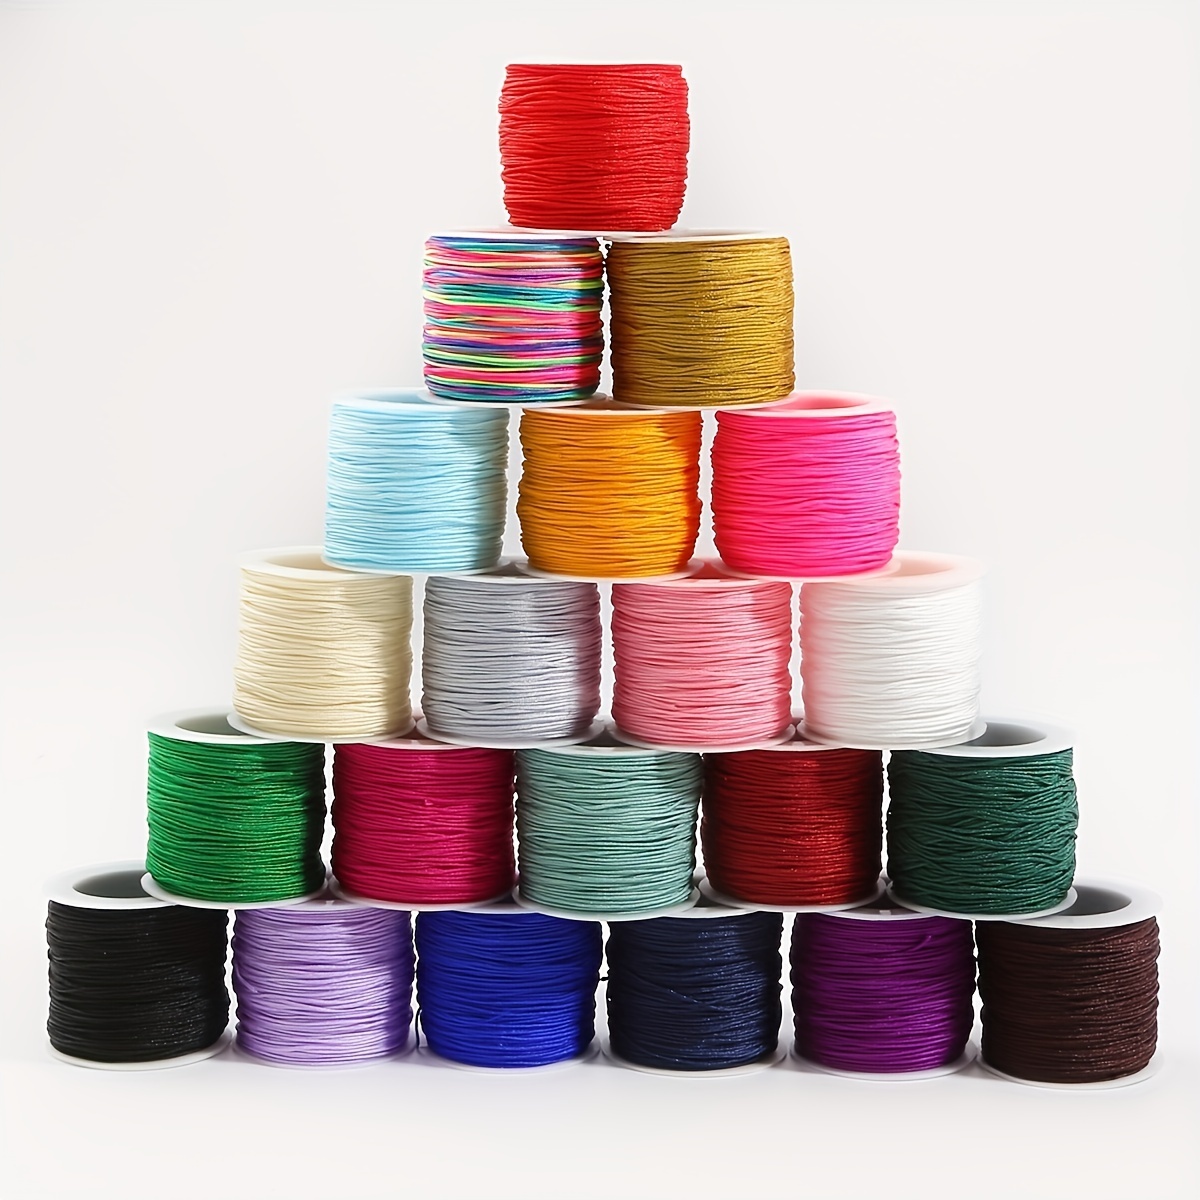 0.5/0.8/1.0/1.5/2.0/2.5/3.0mm Colorful Waxed Cord Cotton Thread Cord String  DIY